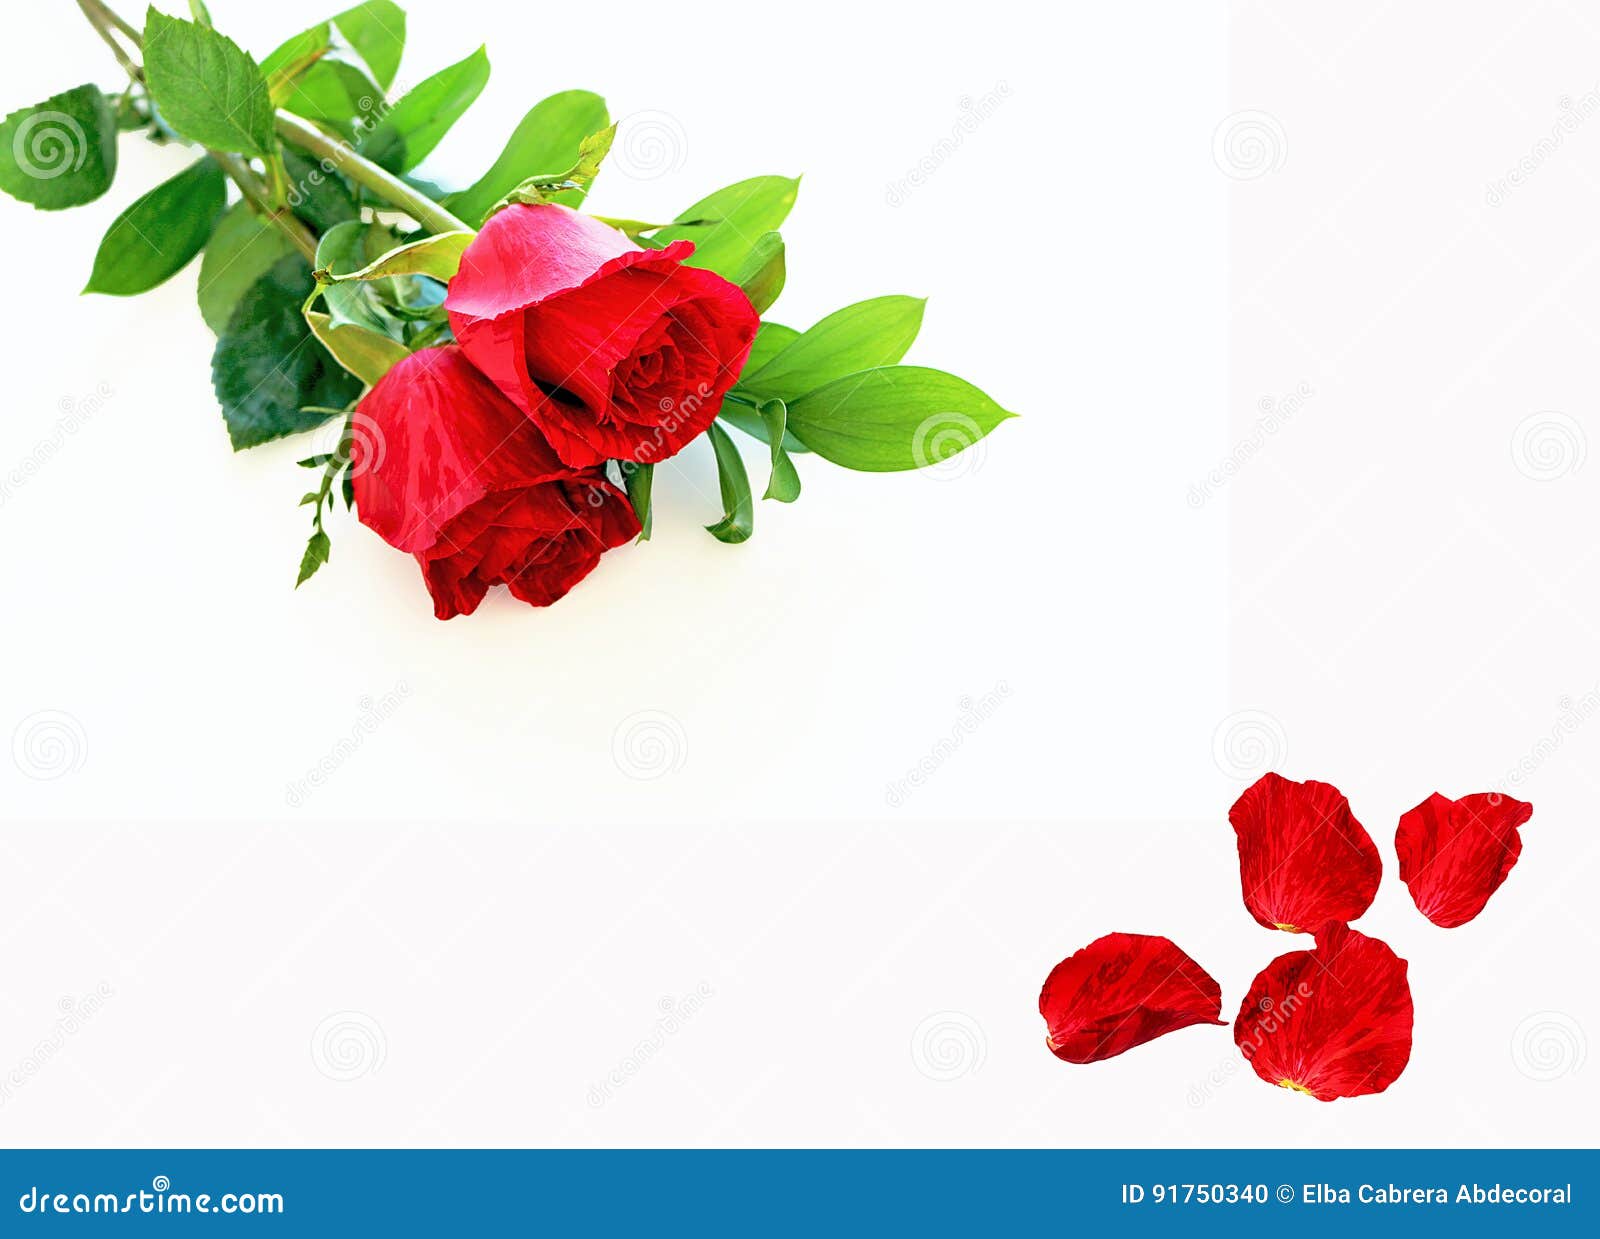 red roses and petals